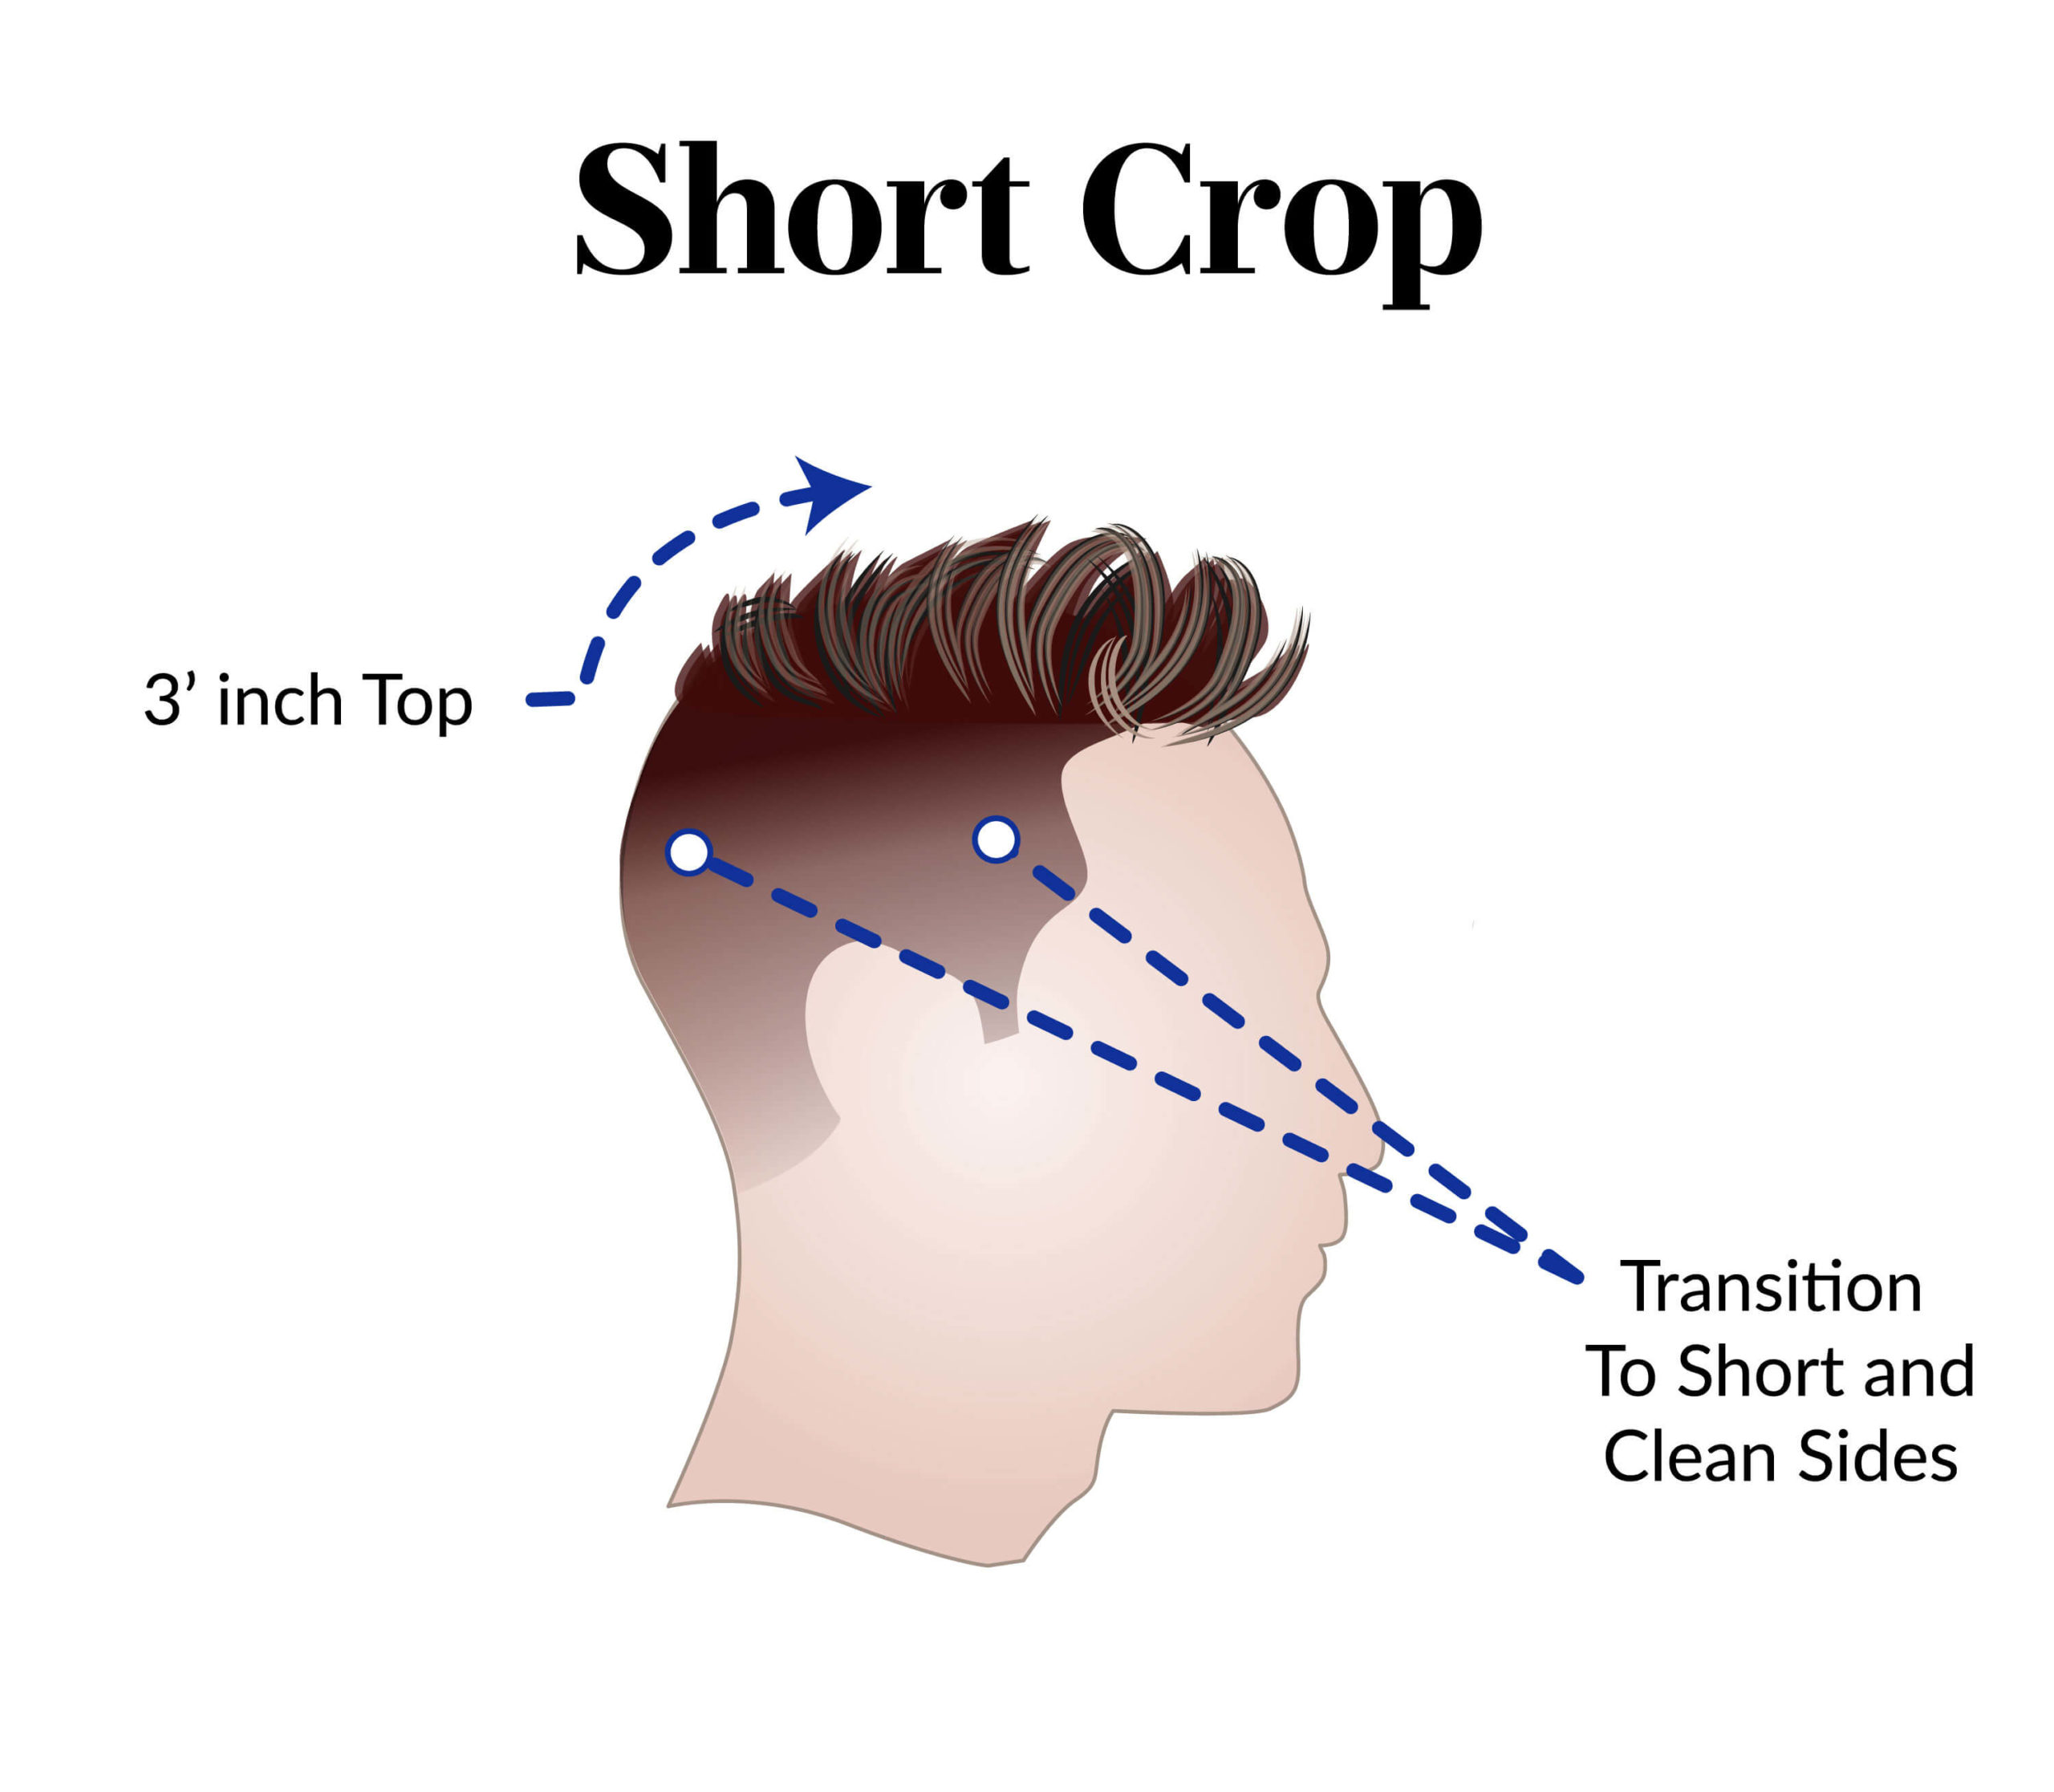 short crop is the perfect men's hairstyle for 20s